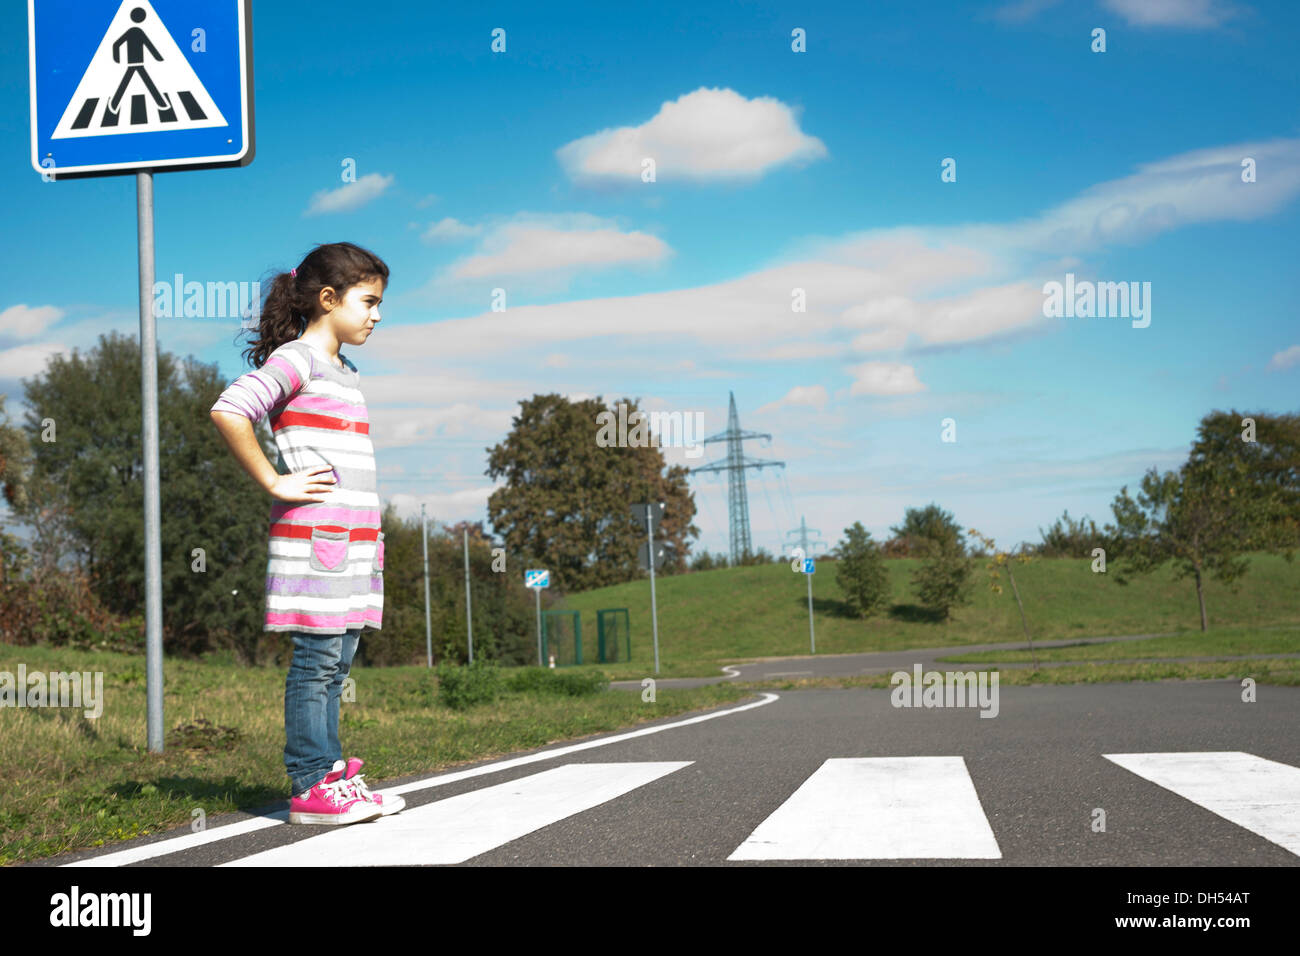 Girl waiting at a zebra crossing Stock Photo